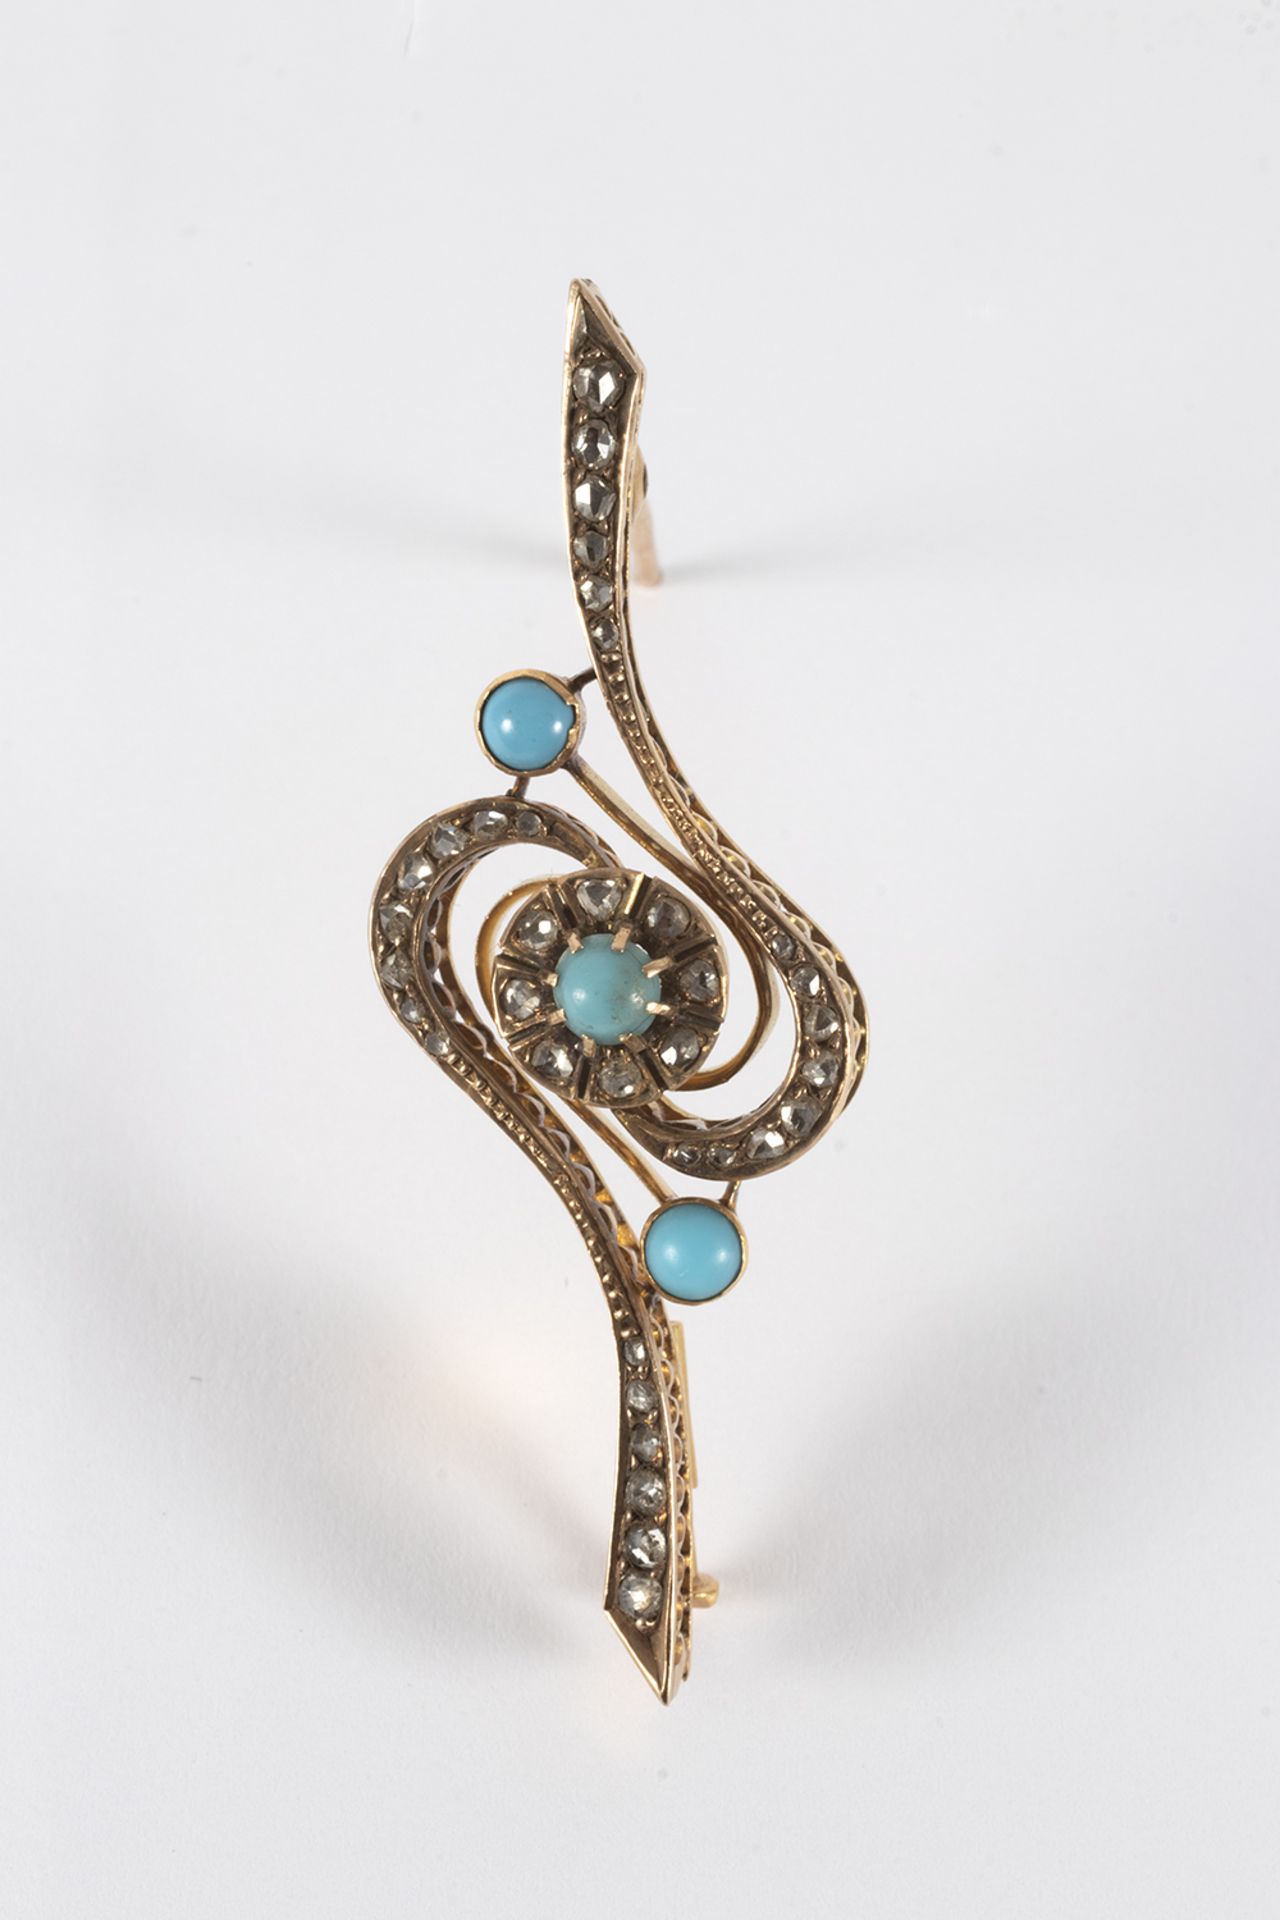 Elizabethan brooch in gold, rose cut diamonds and cabochon cut turquoise.